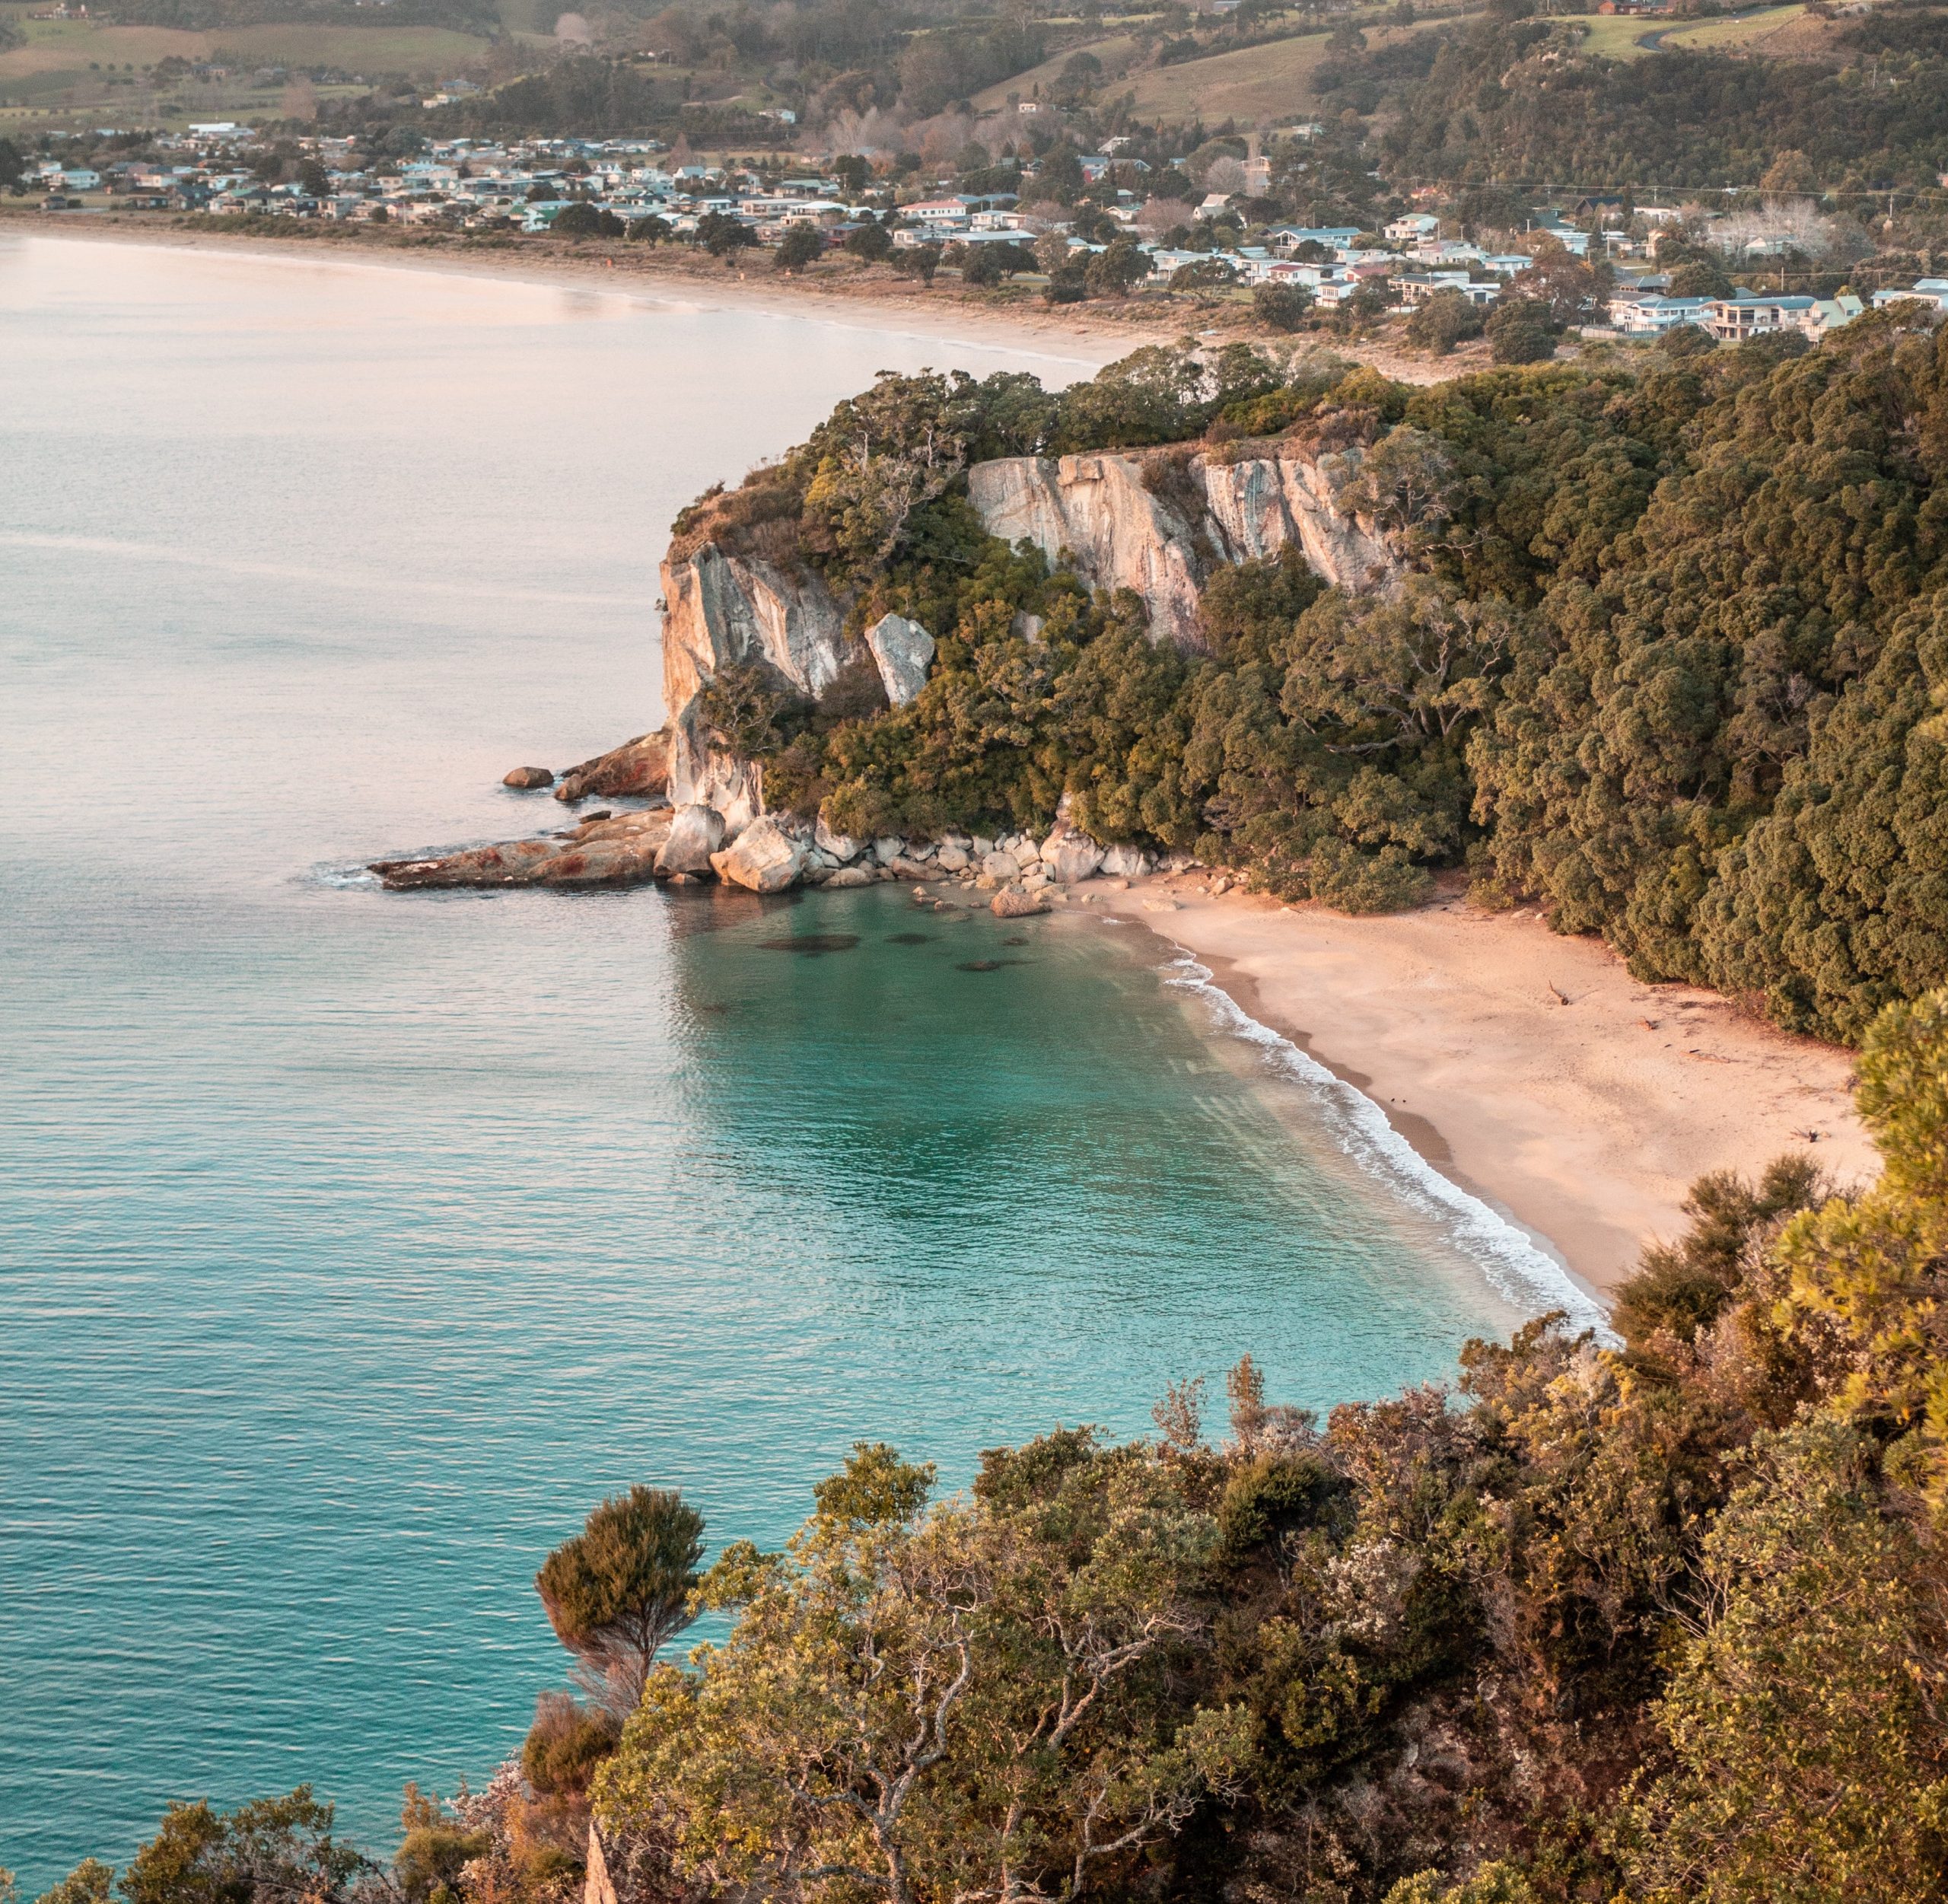 A vantage point overlooking a small bay with golden sand and gentle turquoise waves with a cliff behind it and a seaside town with houses and telephone lines.